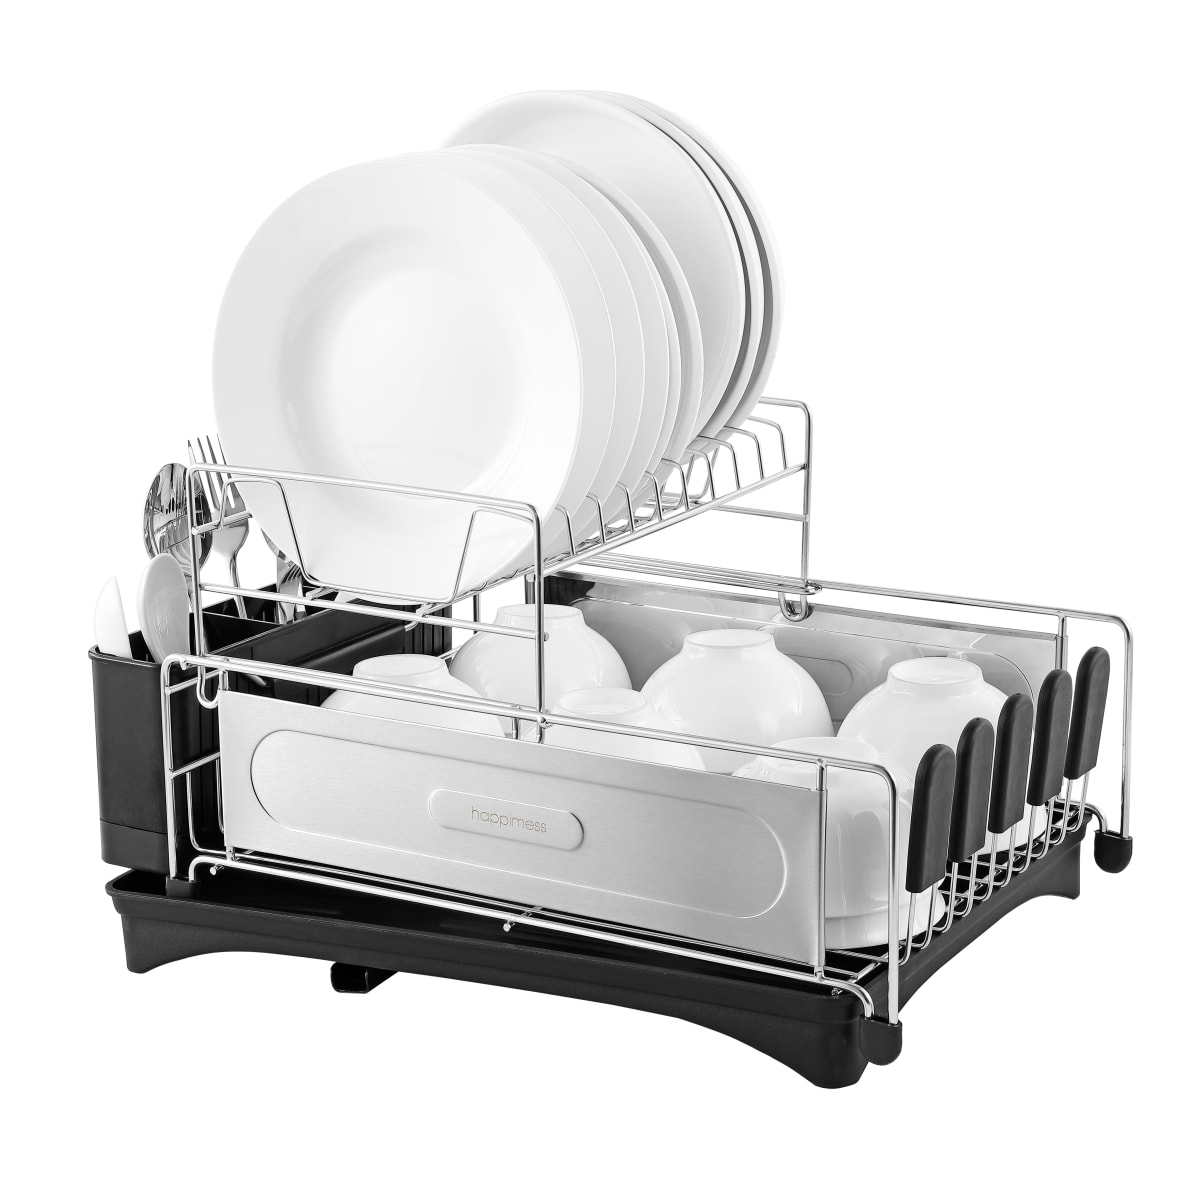 happimess Compact 2-Tier Fingerprint-Proof Stainless Steel Dish Drying Rack